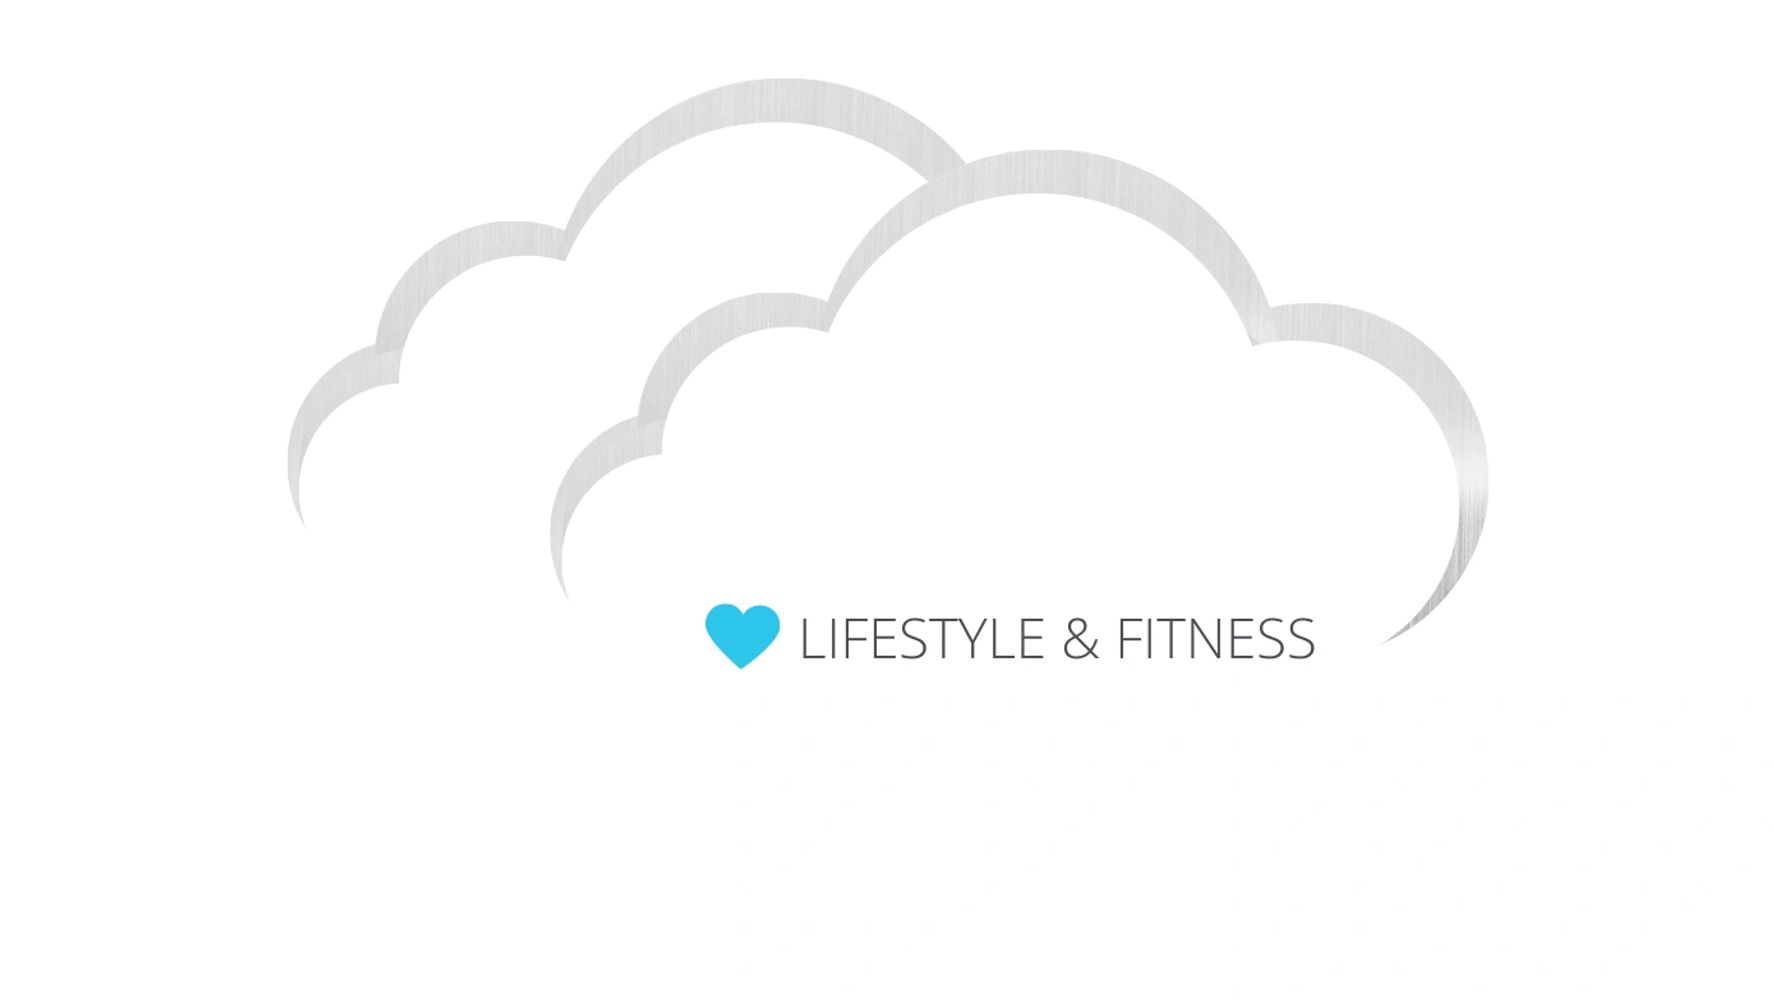 All Silver Clouds - sparkling silver linings - lifestyle & fitness & lightness